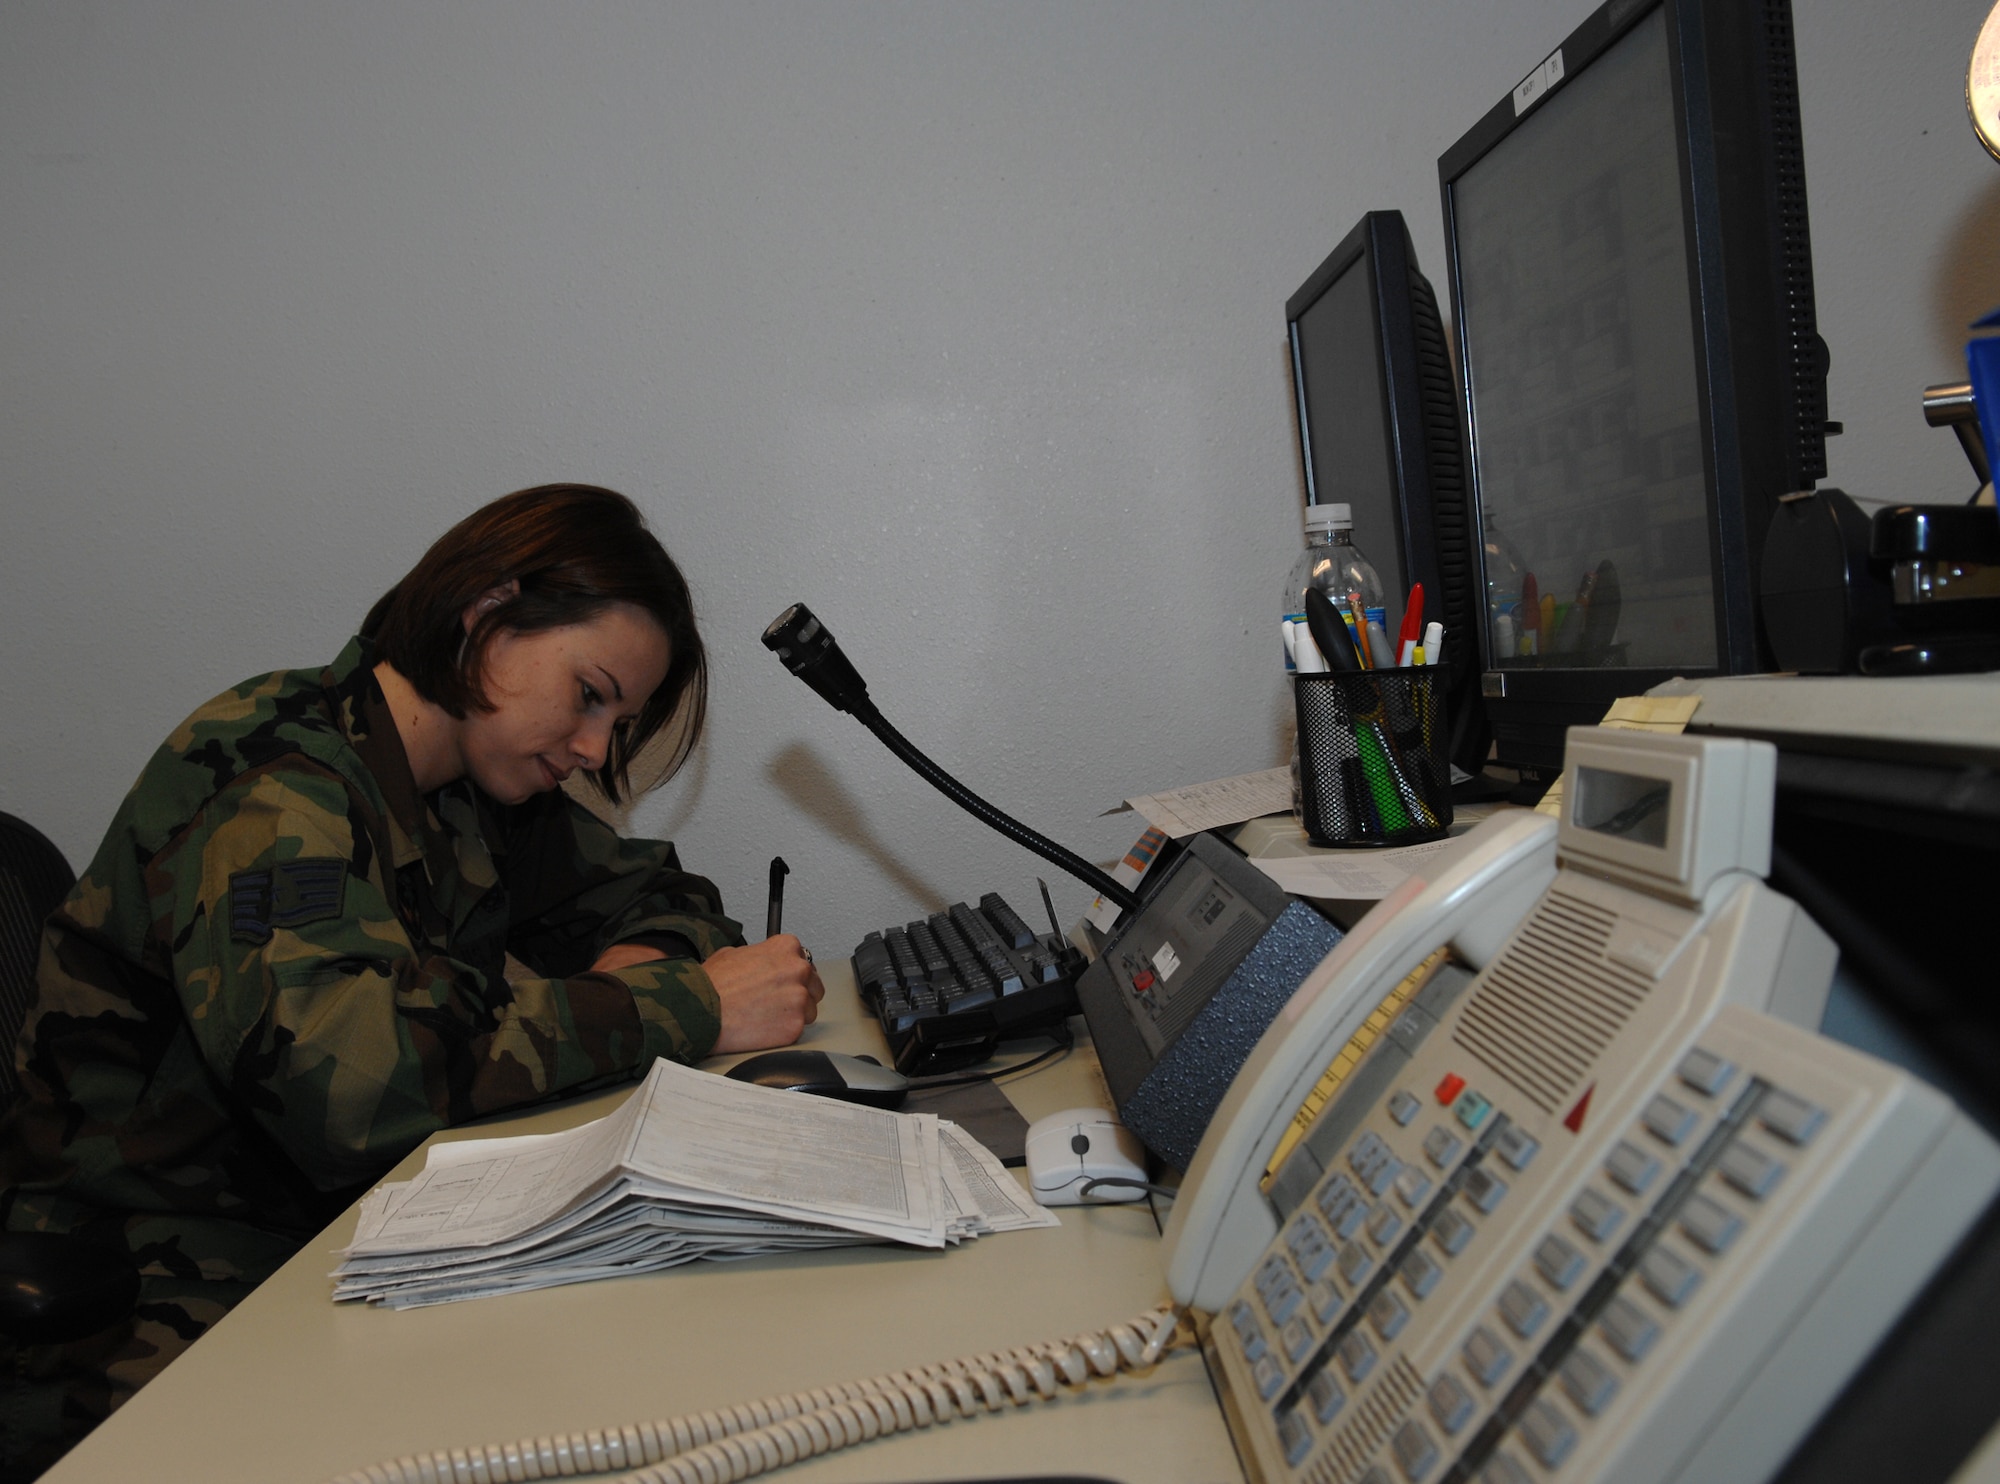 WHITEMAN AIR FORCE BASE, Mo. -- Staff Sgt. Mandy Guyton, 509th Munitions Squadron, processes information to help keep the squadron running smoothly and efficiently Oct. 24. (U.S. Air Force photo/ Airman 1st Class Stephen Linch)